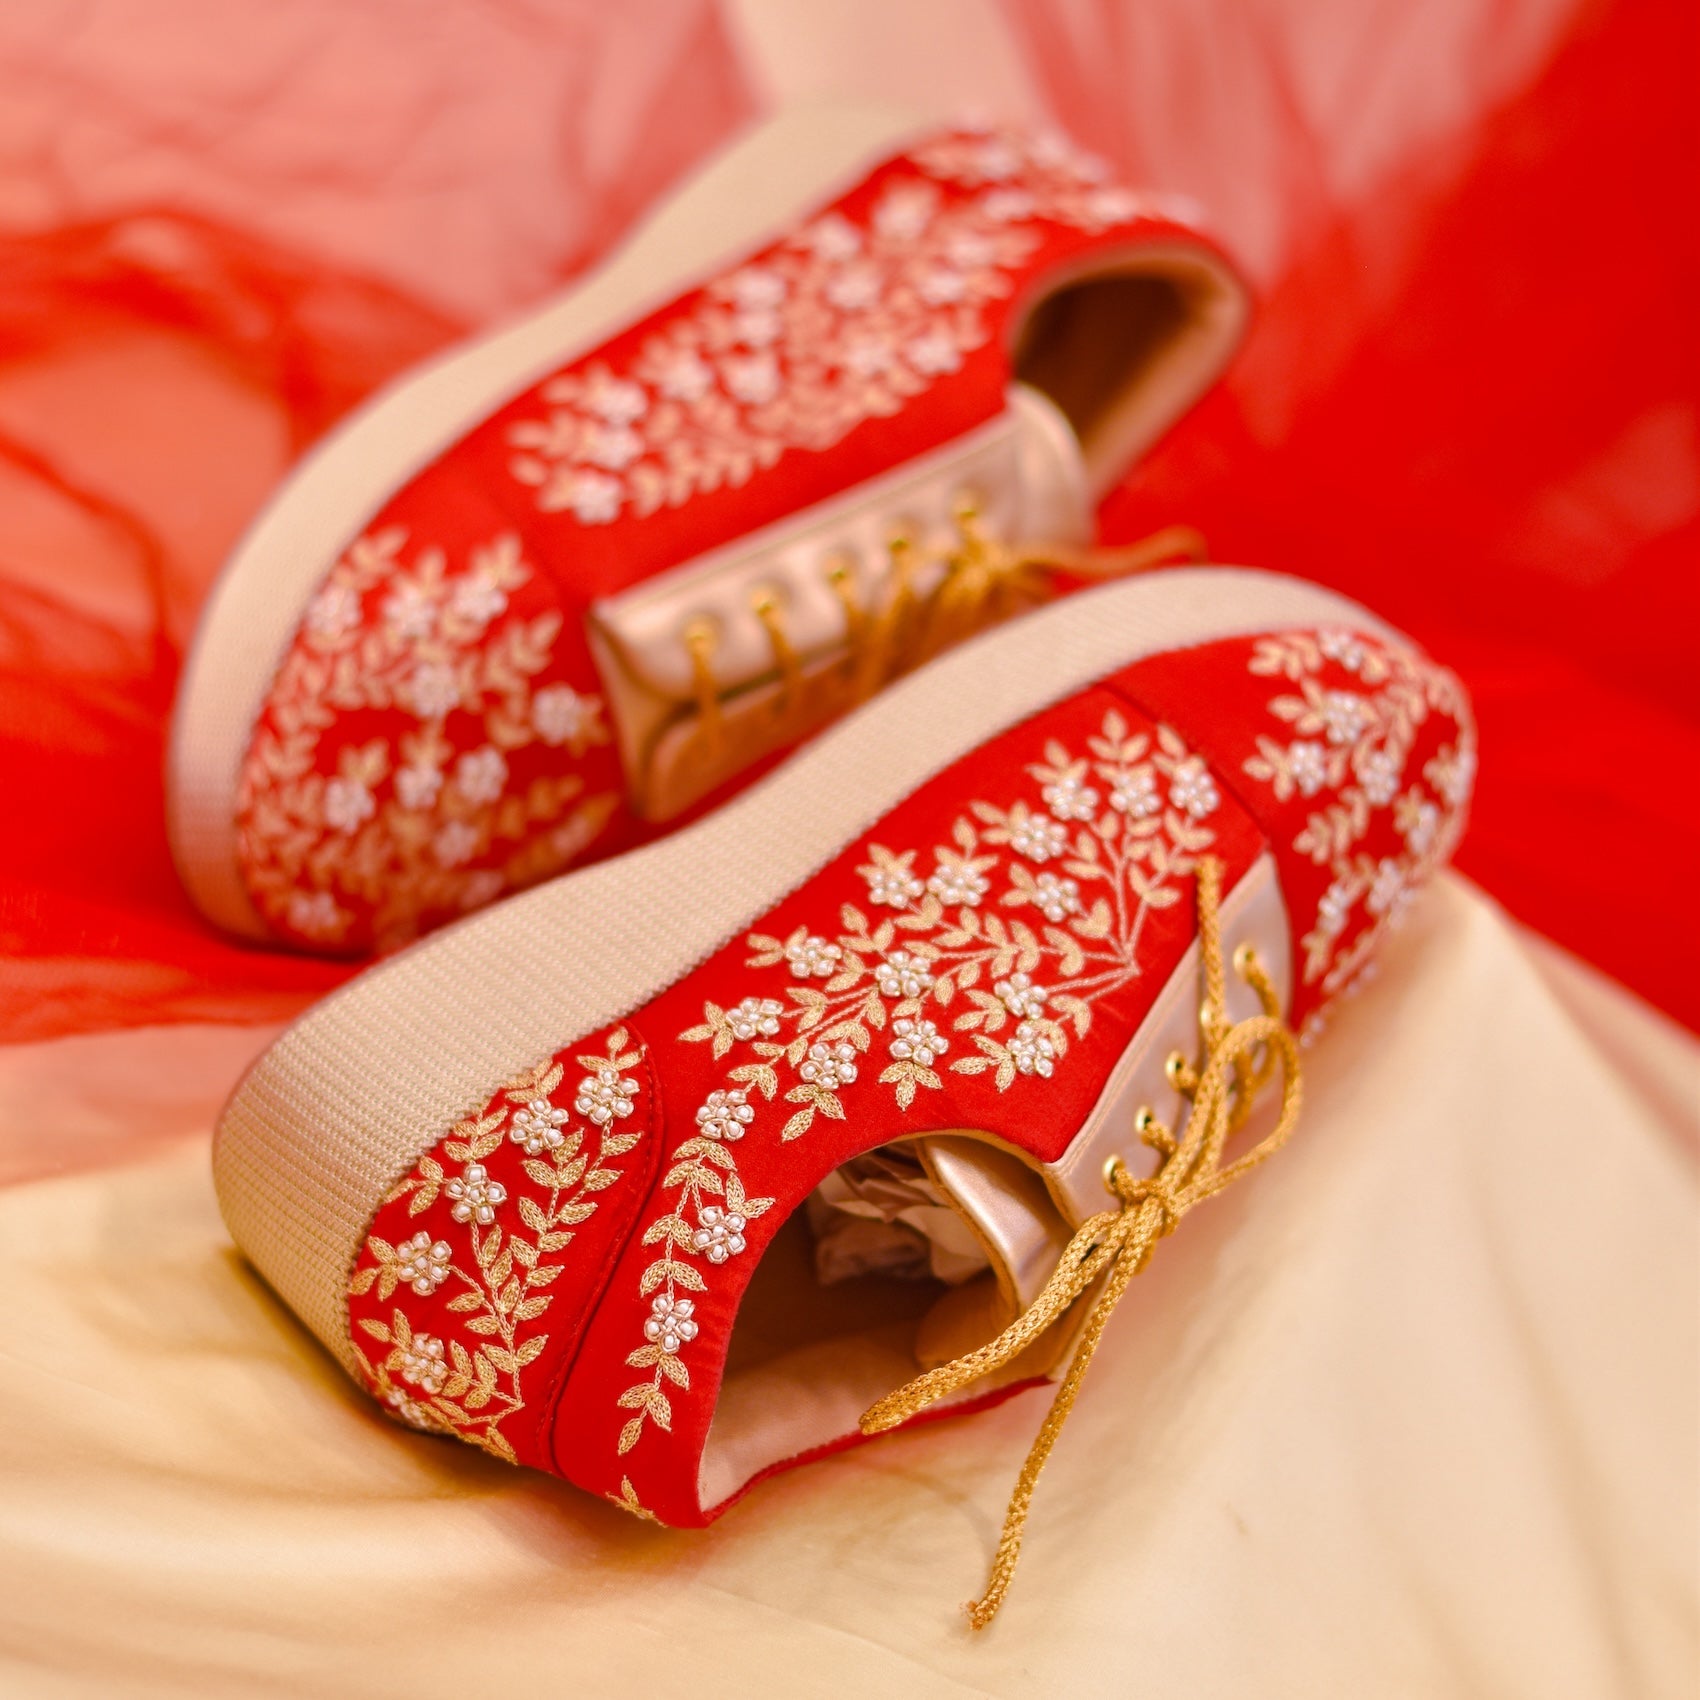 Bridal Sneakers: a New Trend in the Modern-day Indian Weddings